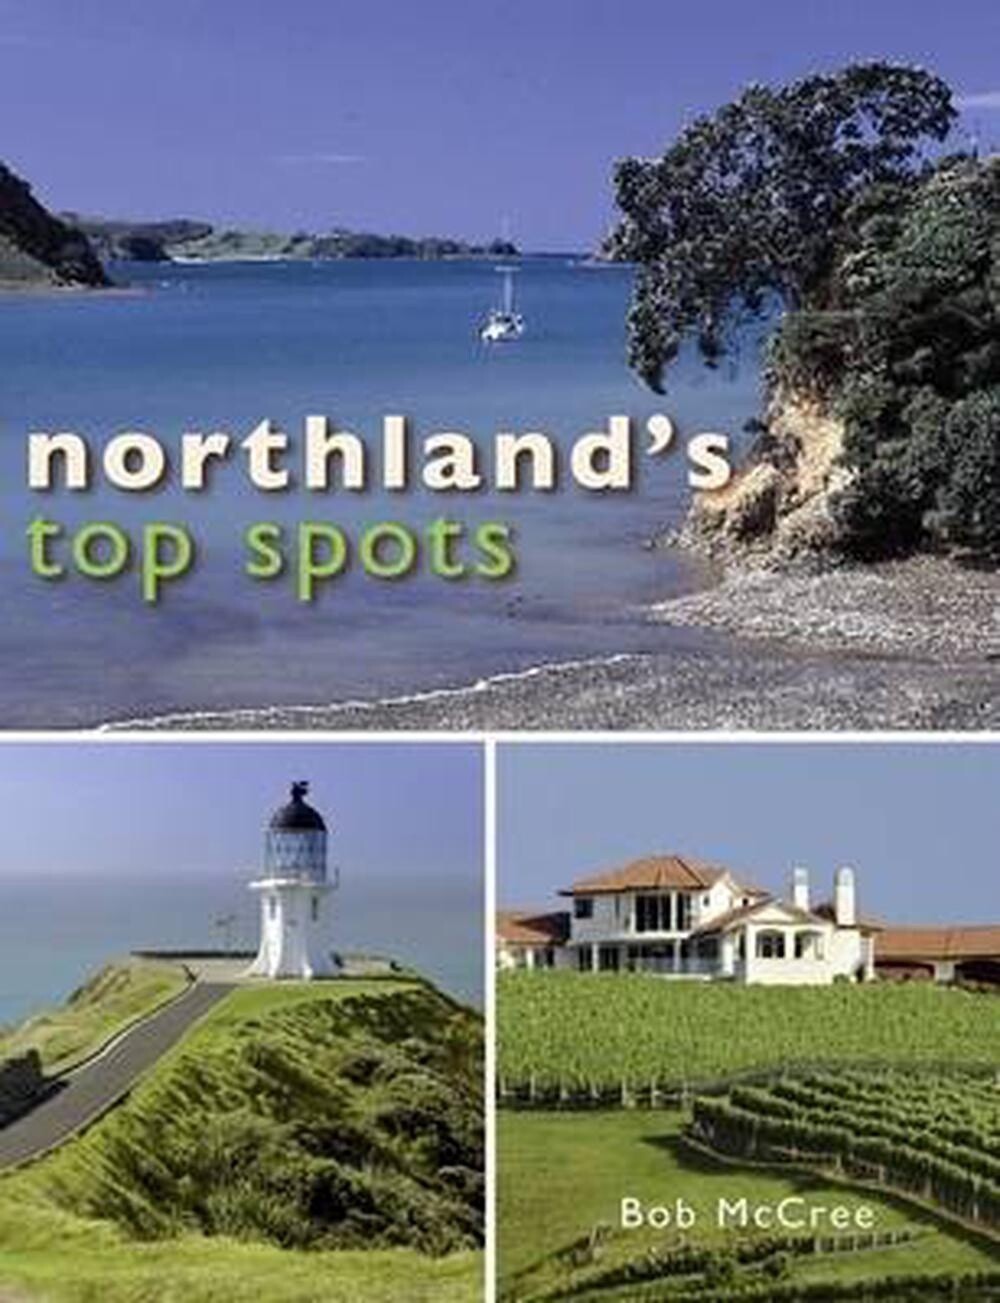 Northland's Top Spot by Bob McCree